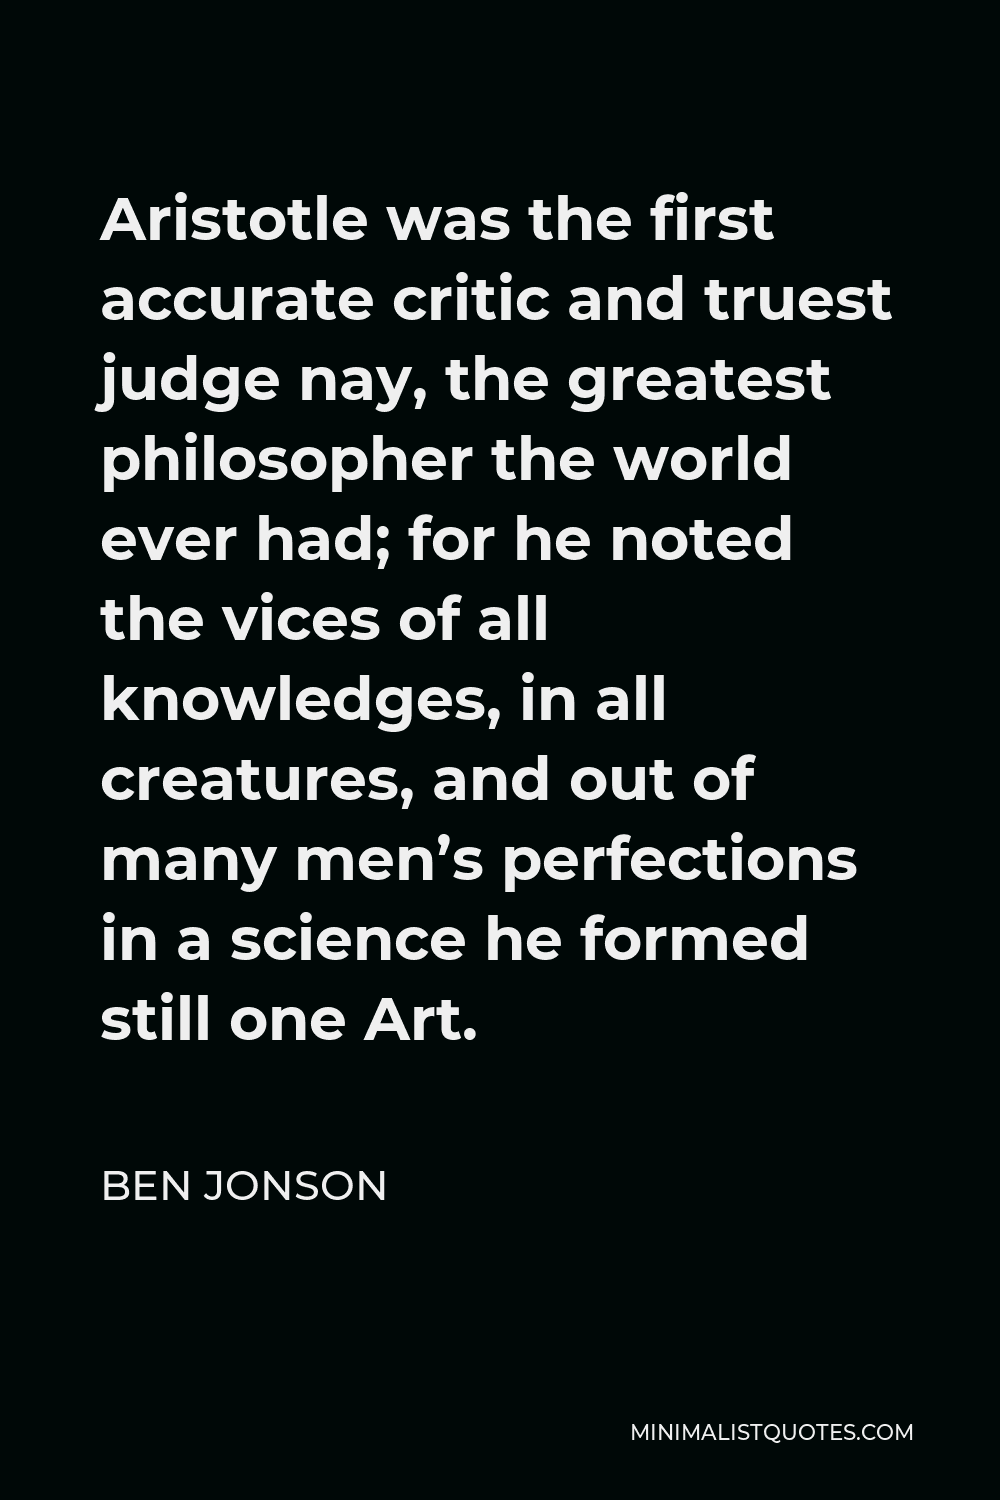 Ben Jonson Quote - Aristotle was the first accurate critic and truest judge nay, the greatest philosopher the world ever had; for he noted the vices of all knowledges, in all creatures, and out of many men’s perfections in a science he formed still one Art.